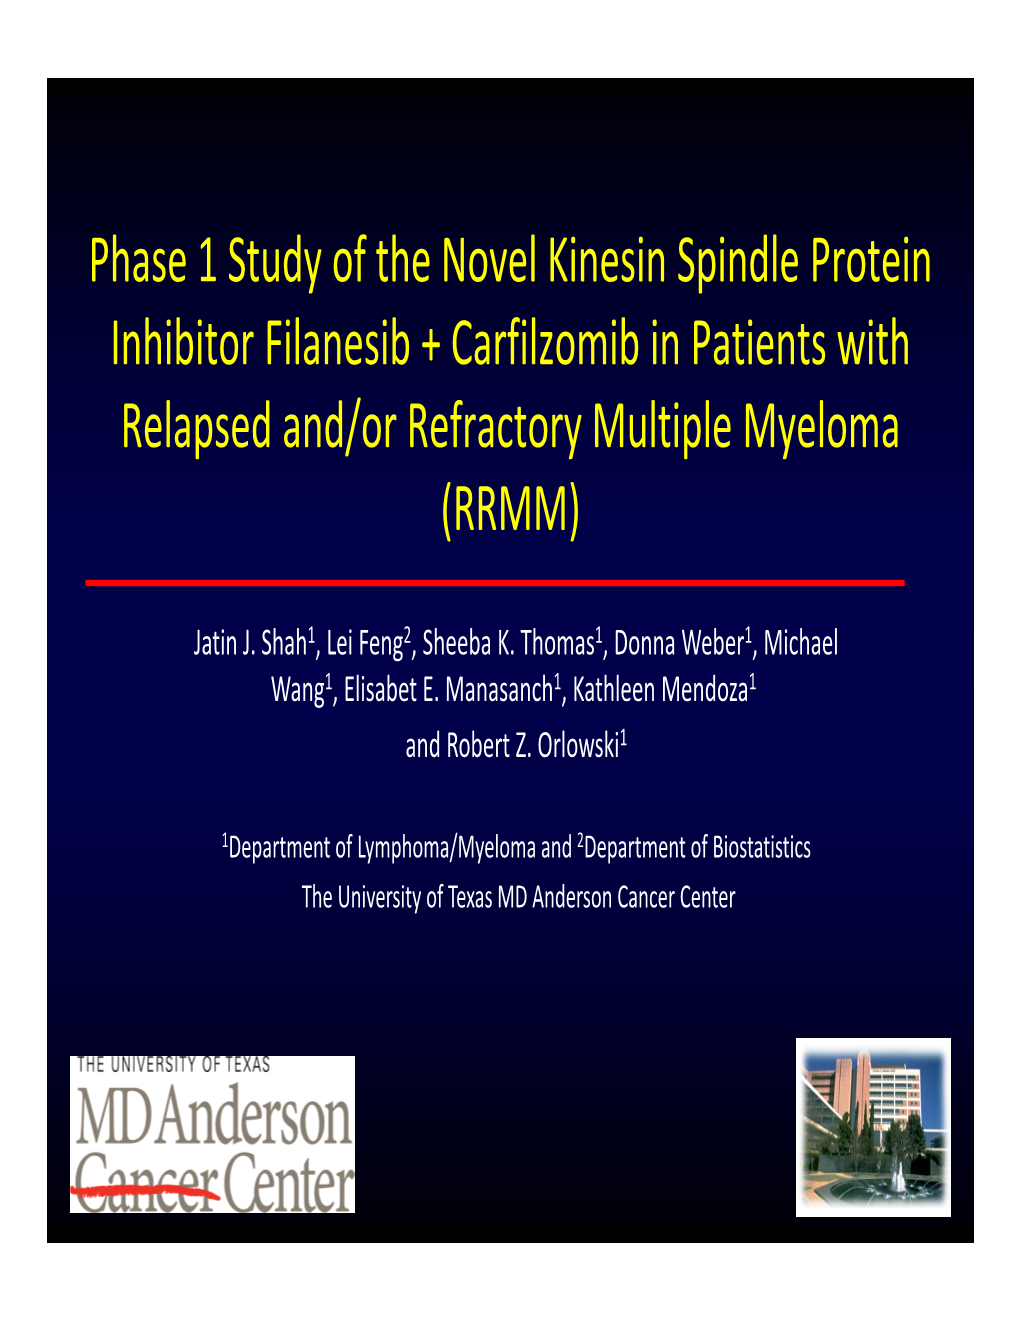 Phase 1 Study of the Novel Kinesin Spindle Protein Inhibitor Filanesib + Carfilzomib in Patients with Relapsed And/Or Refractory Multiple Myeloma (RRMM)